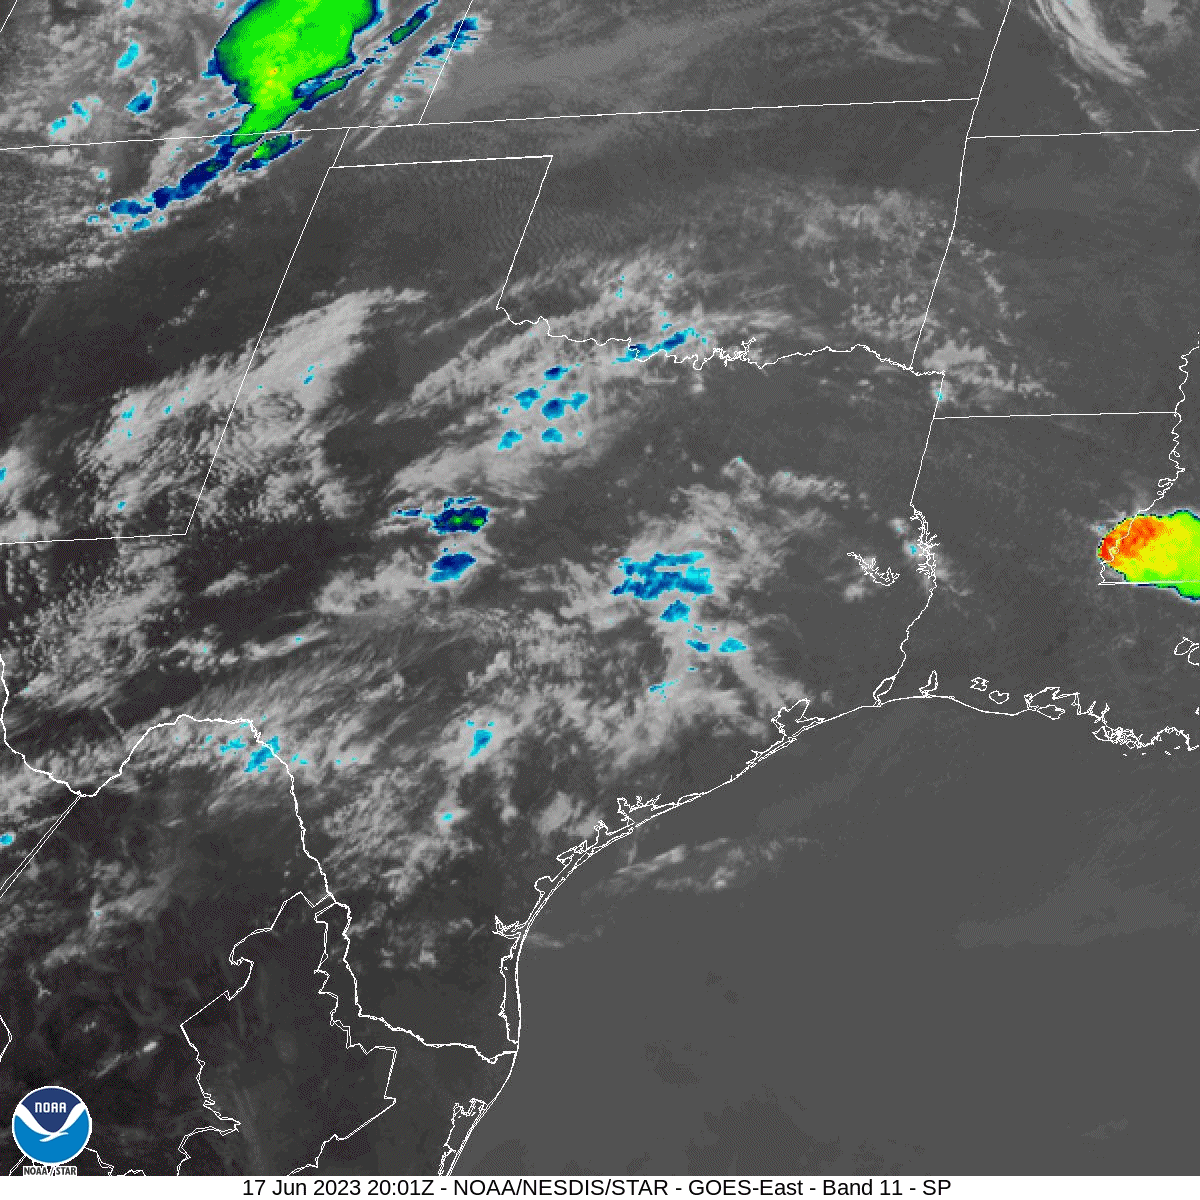 Regional Band 11 Cloud Top Infrared Satellite Loop from 4:01 pm CDT June 17, 2023 to 1:01 am CDT on June 18, 2023